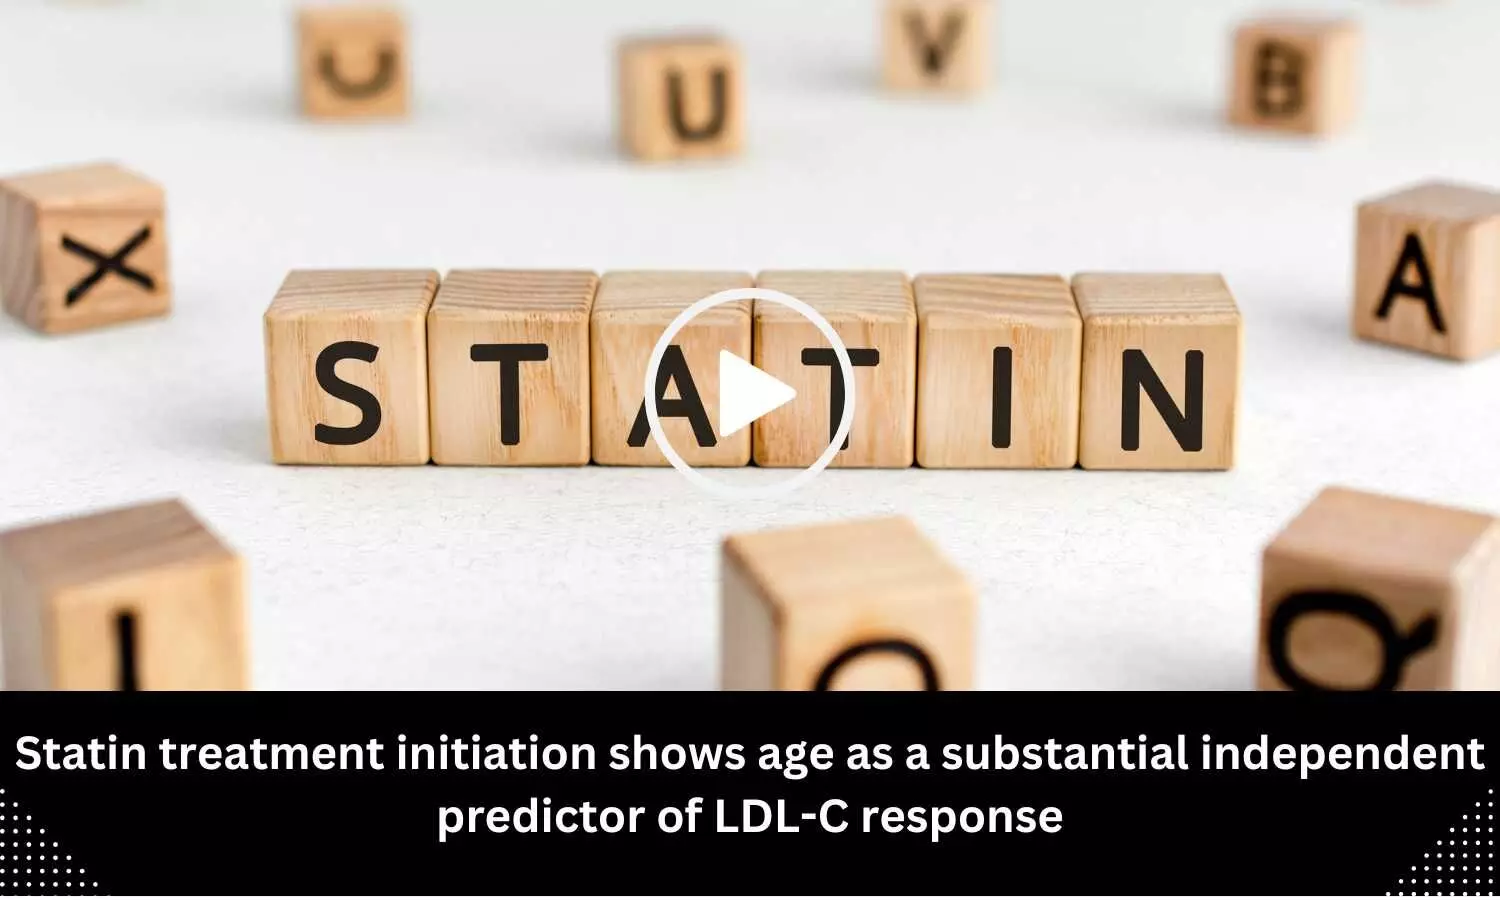 Statin treatment initiation shows age as a substantial independent predictor of LDL-C response